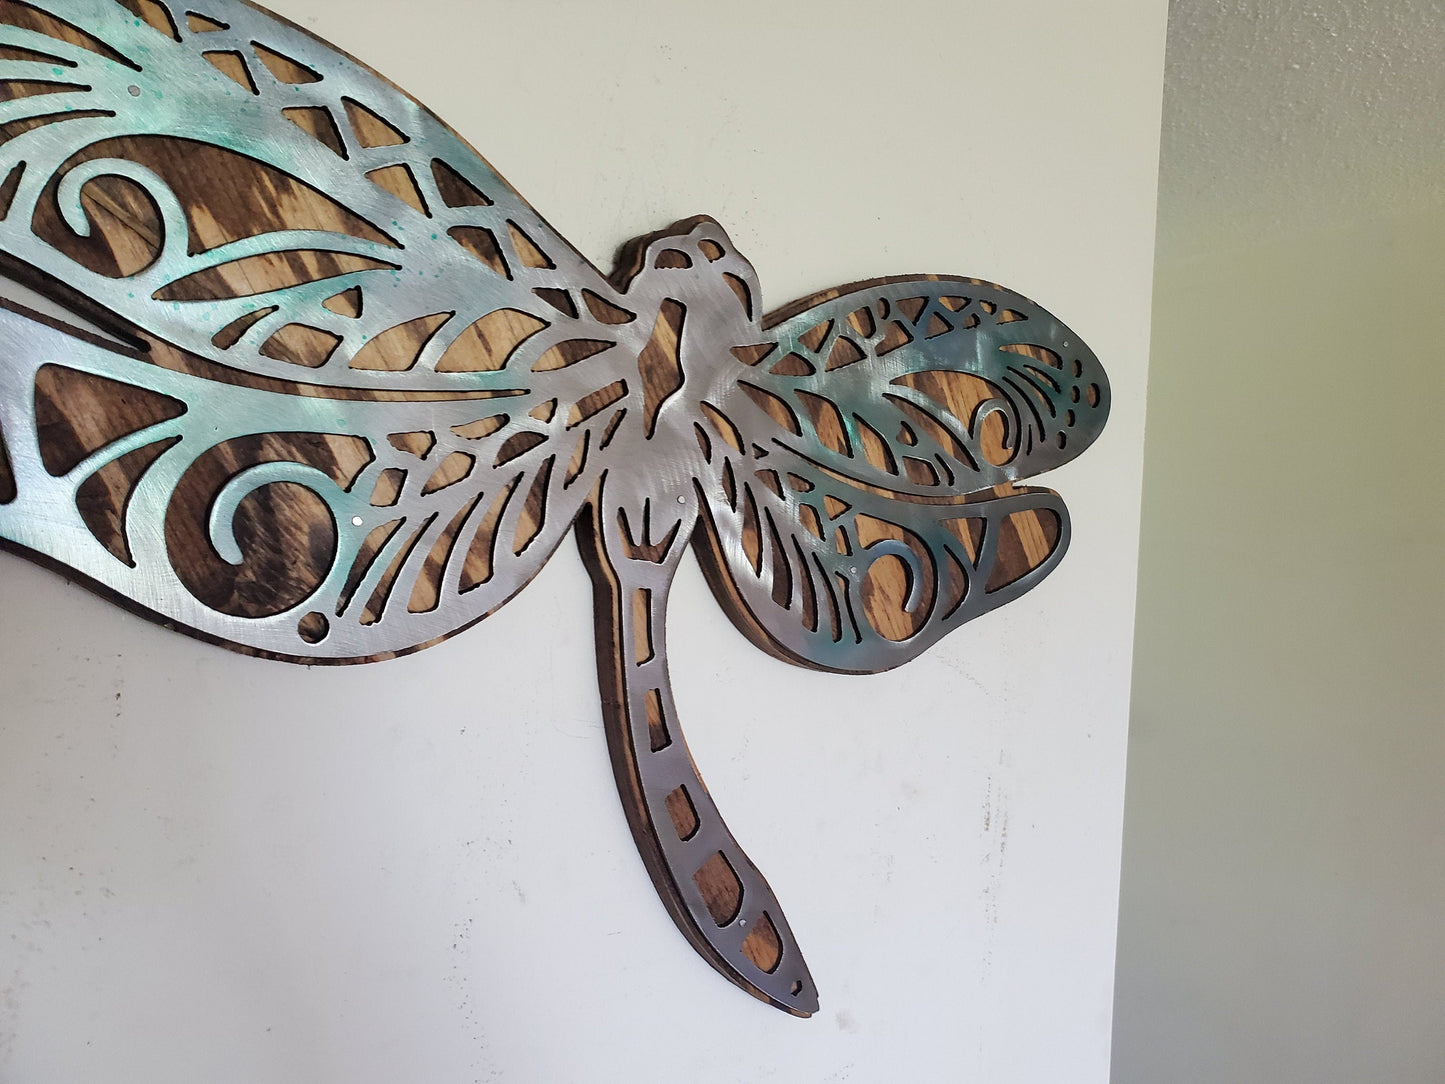  beautiful Dragonfly metal and wood wall sculpture, the perfect addition to any home looking for a unique piece of metal art home decor. This sculpture is made in our family shop in Minnesota, using rustic stained wood and clear-coated steel.